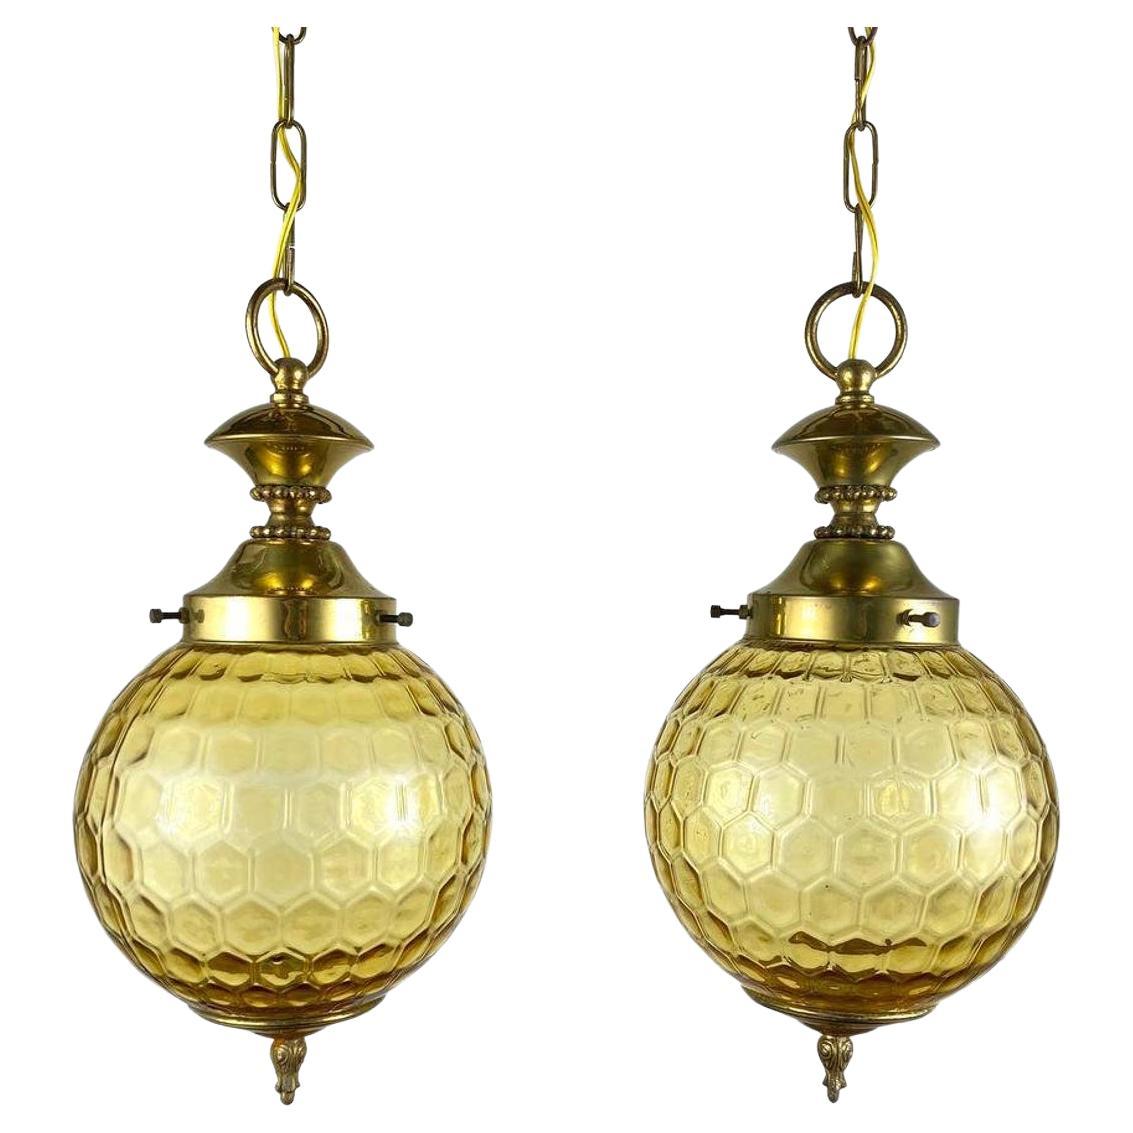 Vintage Ceiling Lamp or Lantern Gilt Brass and Textured Glass Suspention